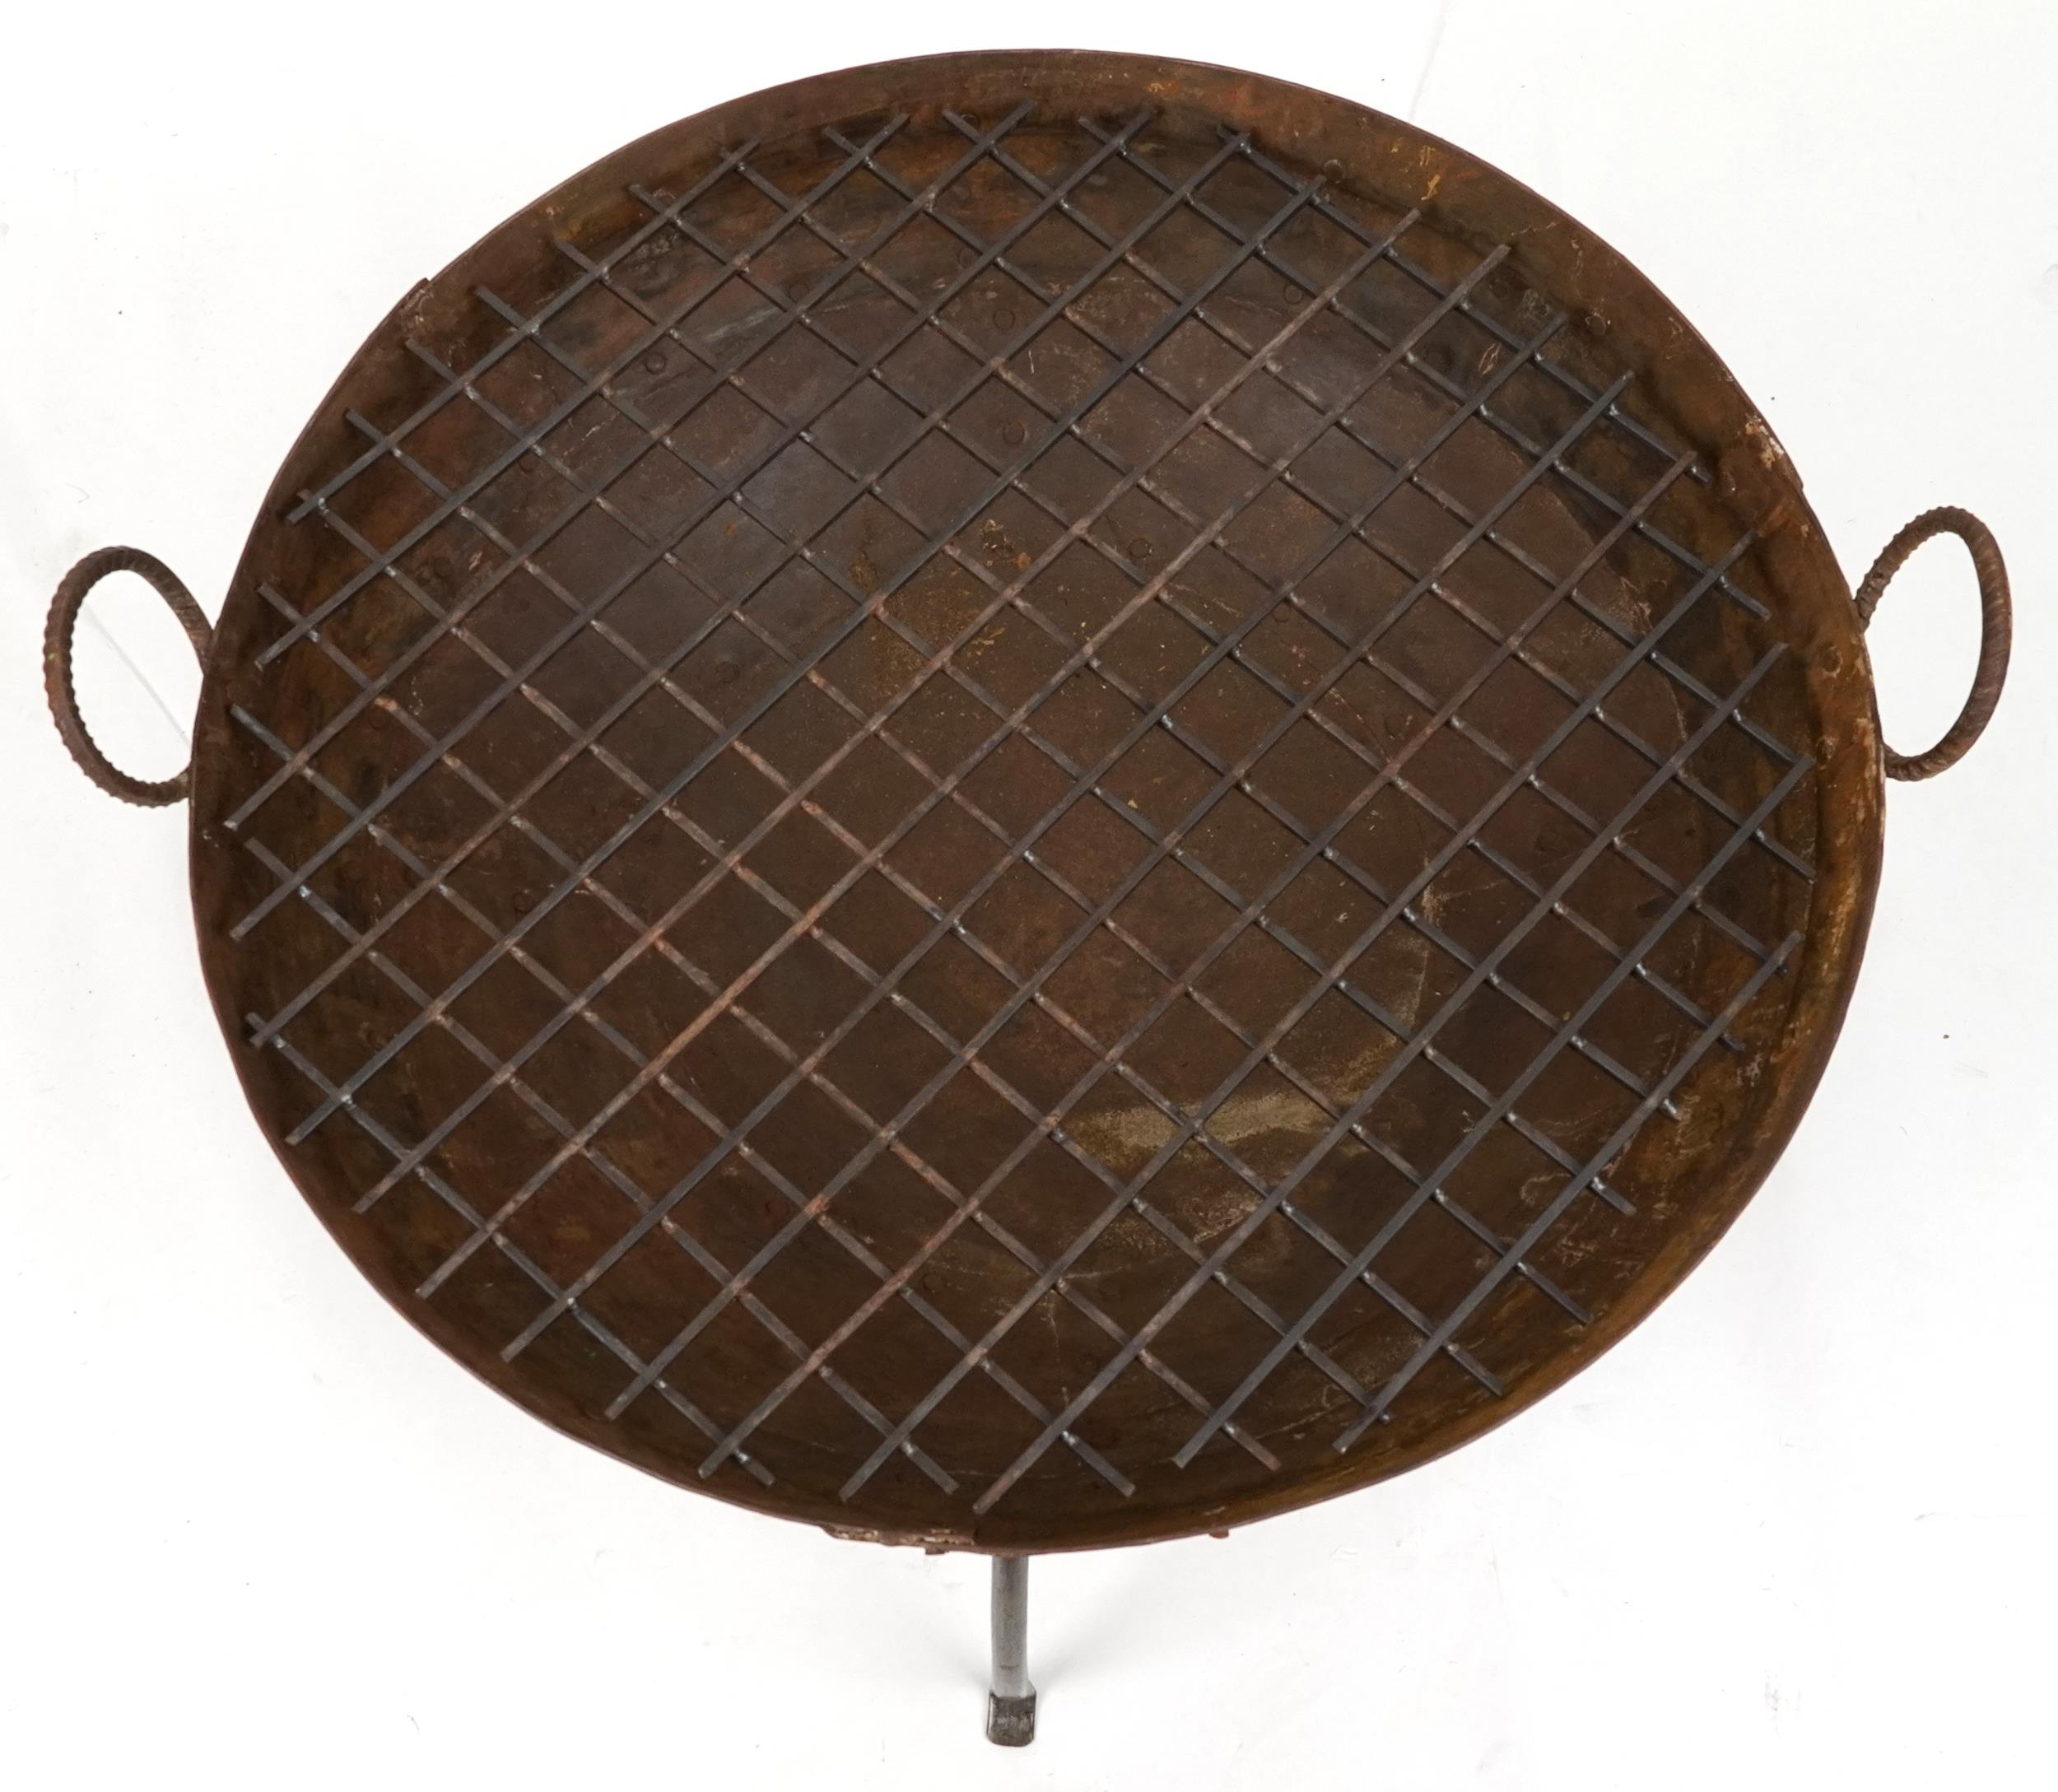 Cast metal firepit with twin handles and grill on tripod stand, 50cm high x 90.5cm in diameter - Image 2 of 3